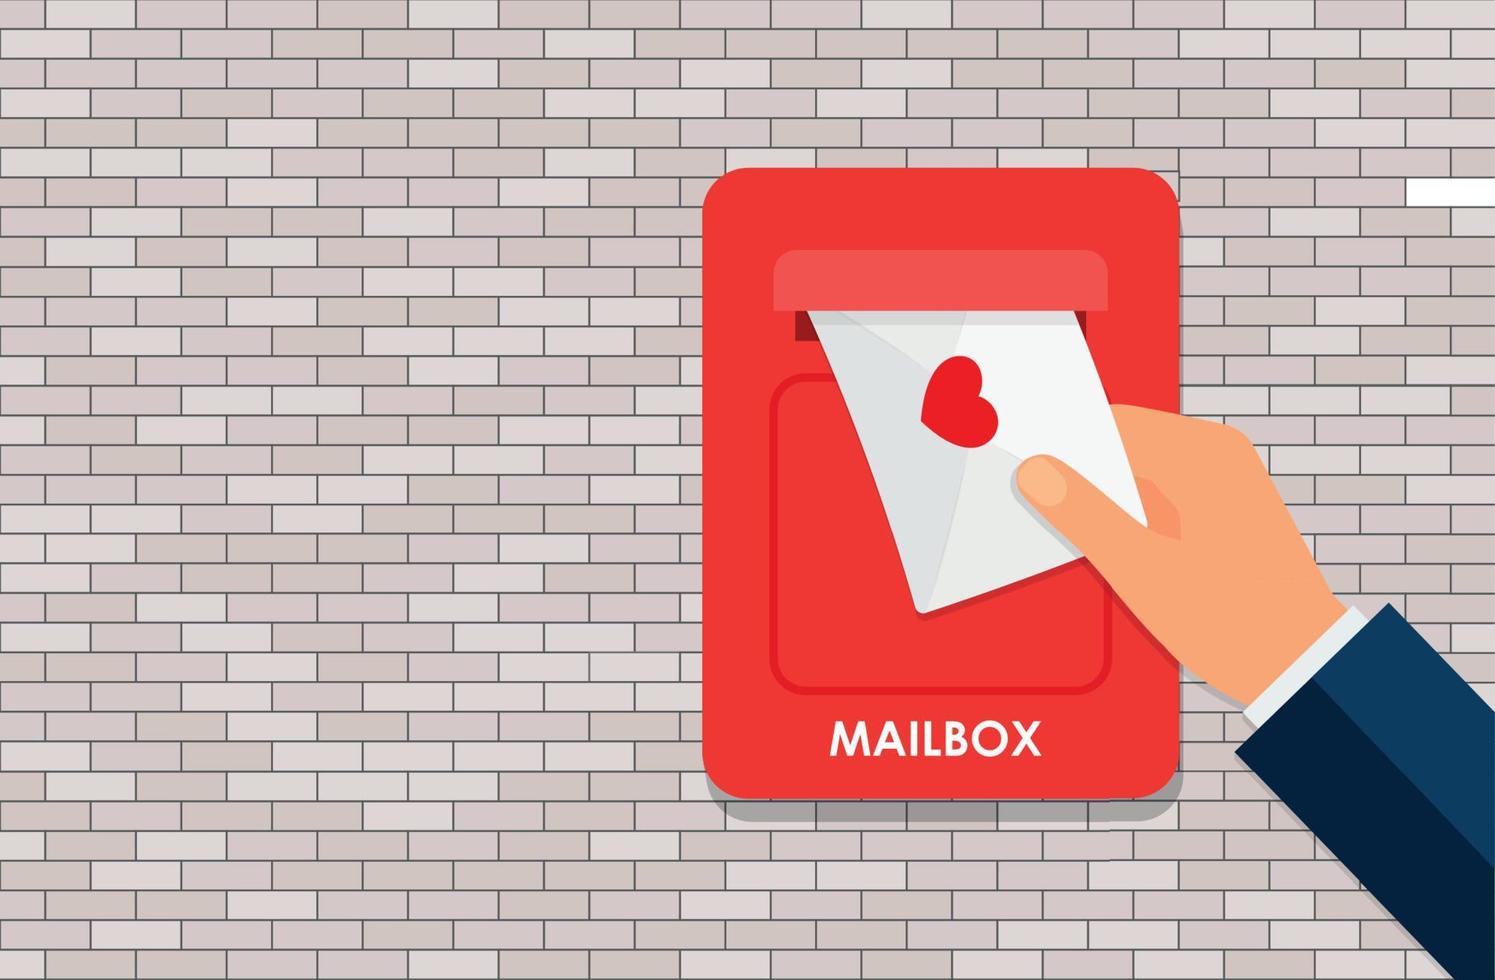 Human hand is taking out an envelope from a postbox. Flat vector illustration of mailbox and a hand holding sealed letter. Receiving a correspondence, postal, mail concept isolated on white background